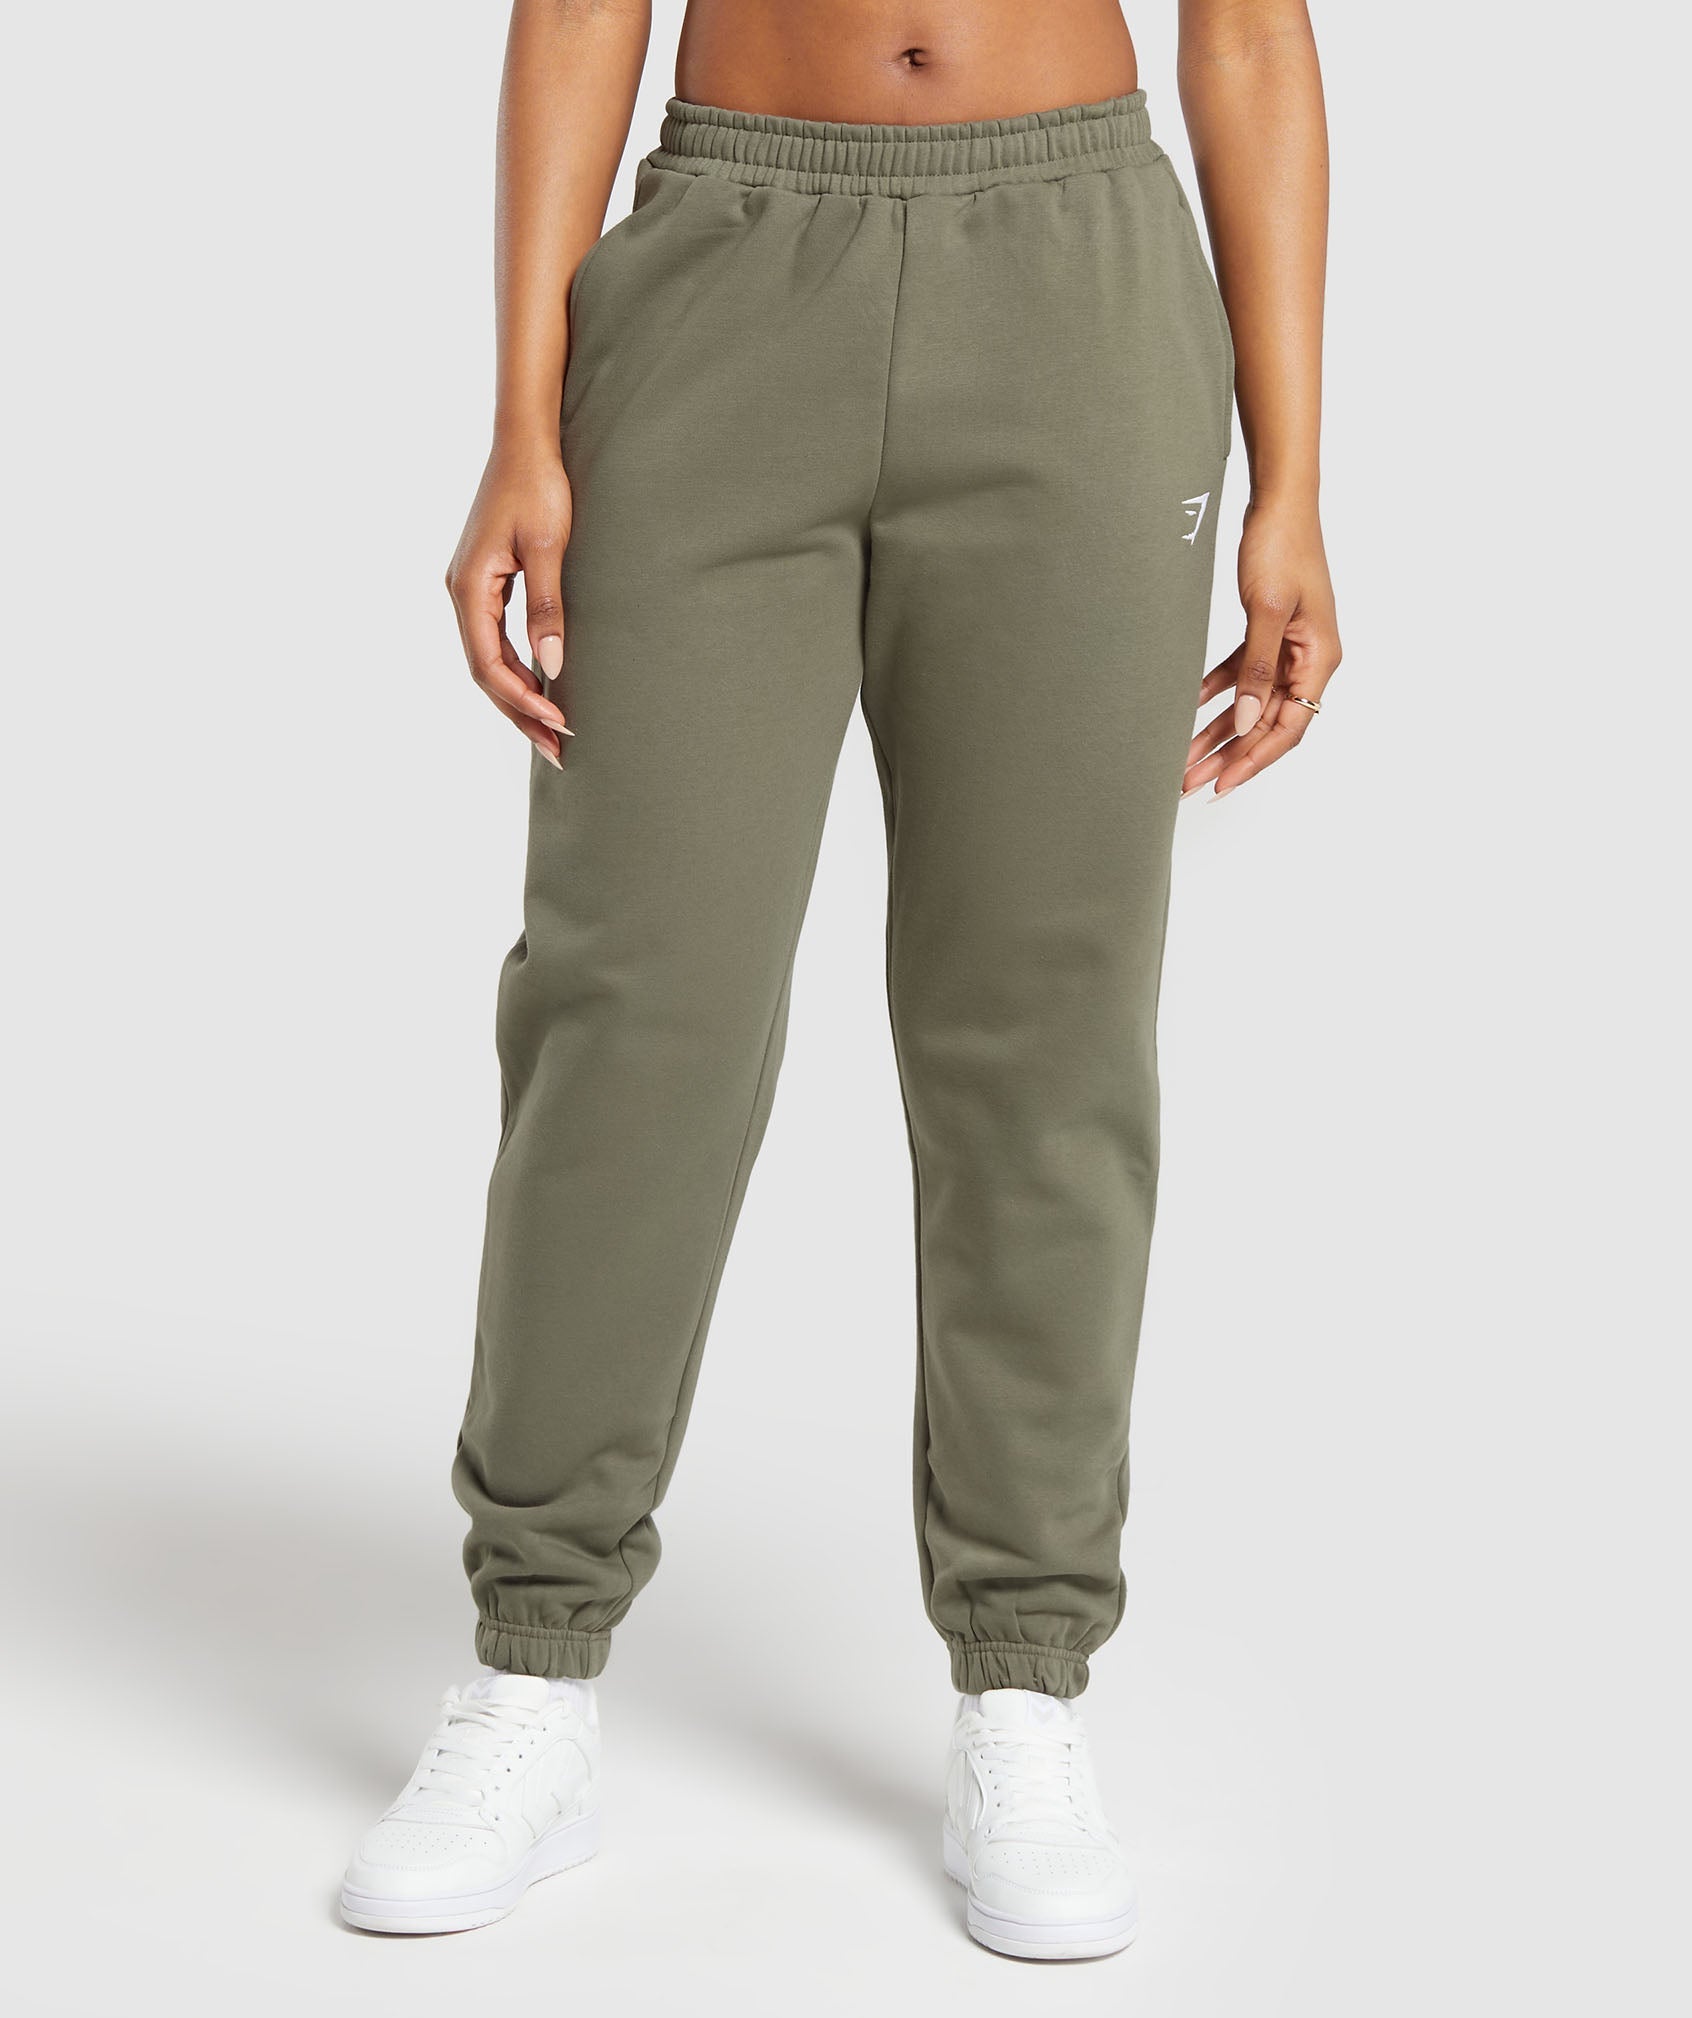 Training Fleece Joggers in Base Green is out of stock